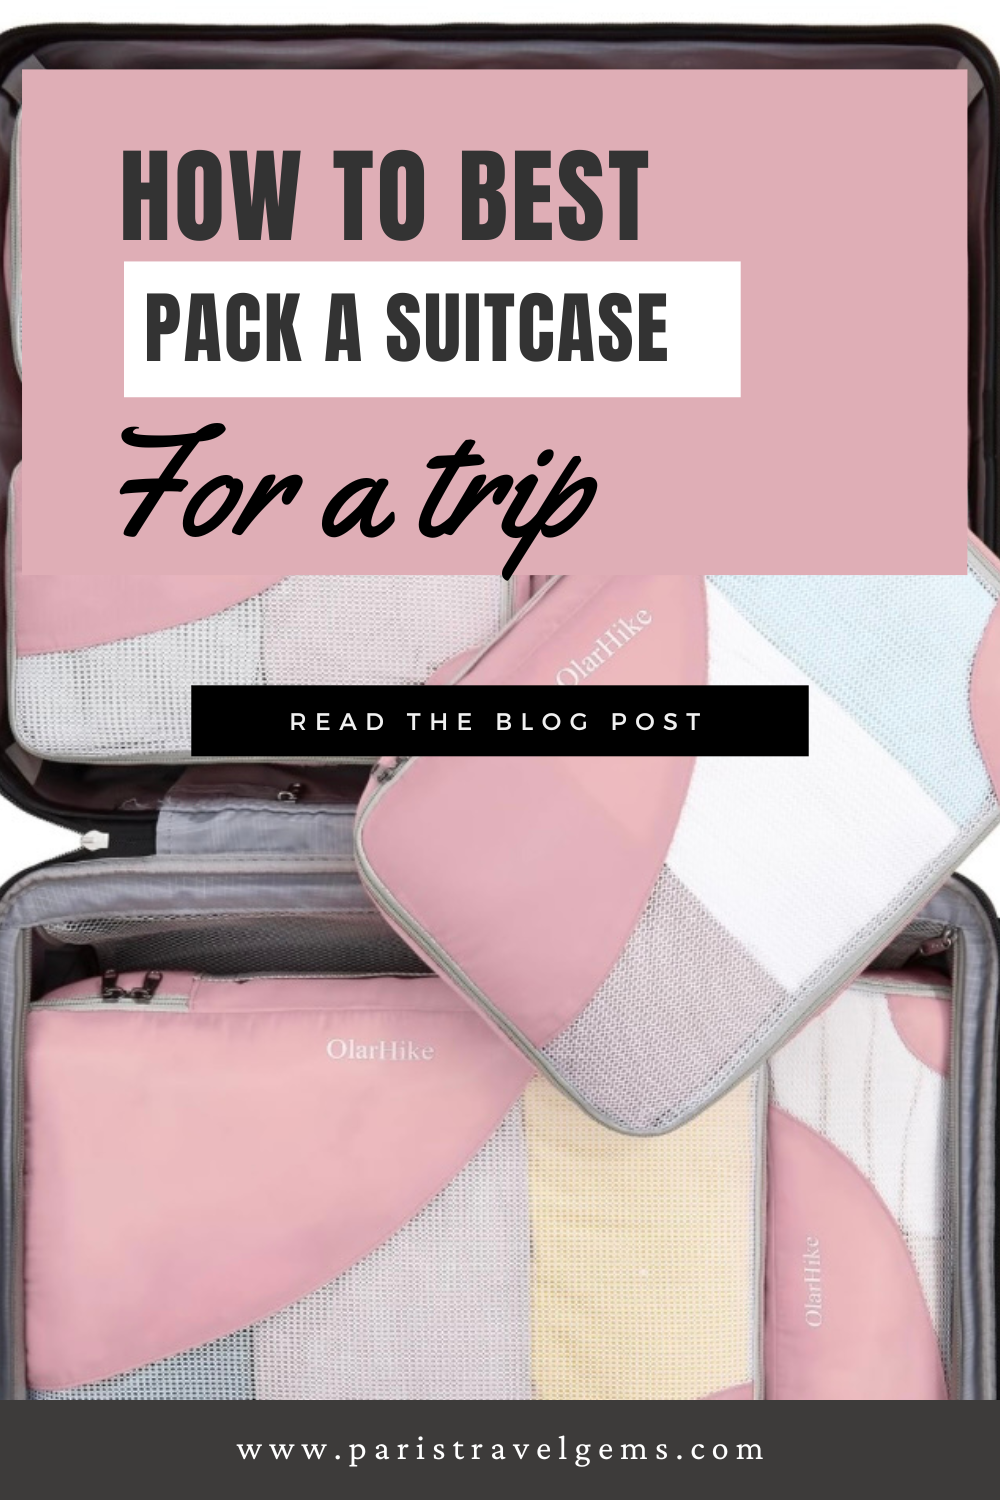 How to best pack a suitcase for a trip